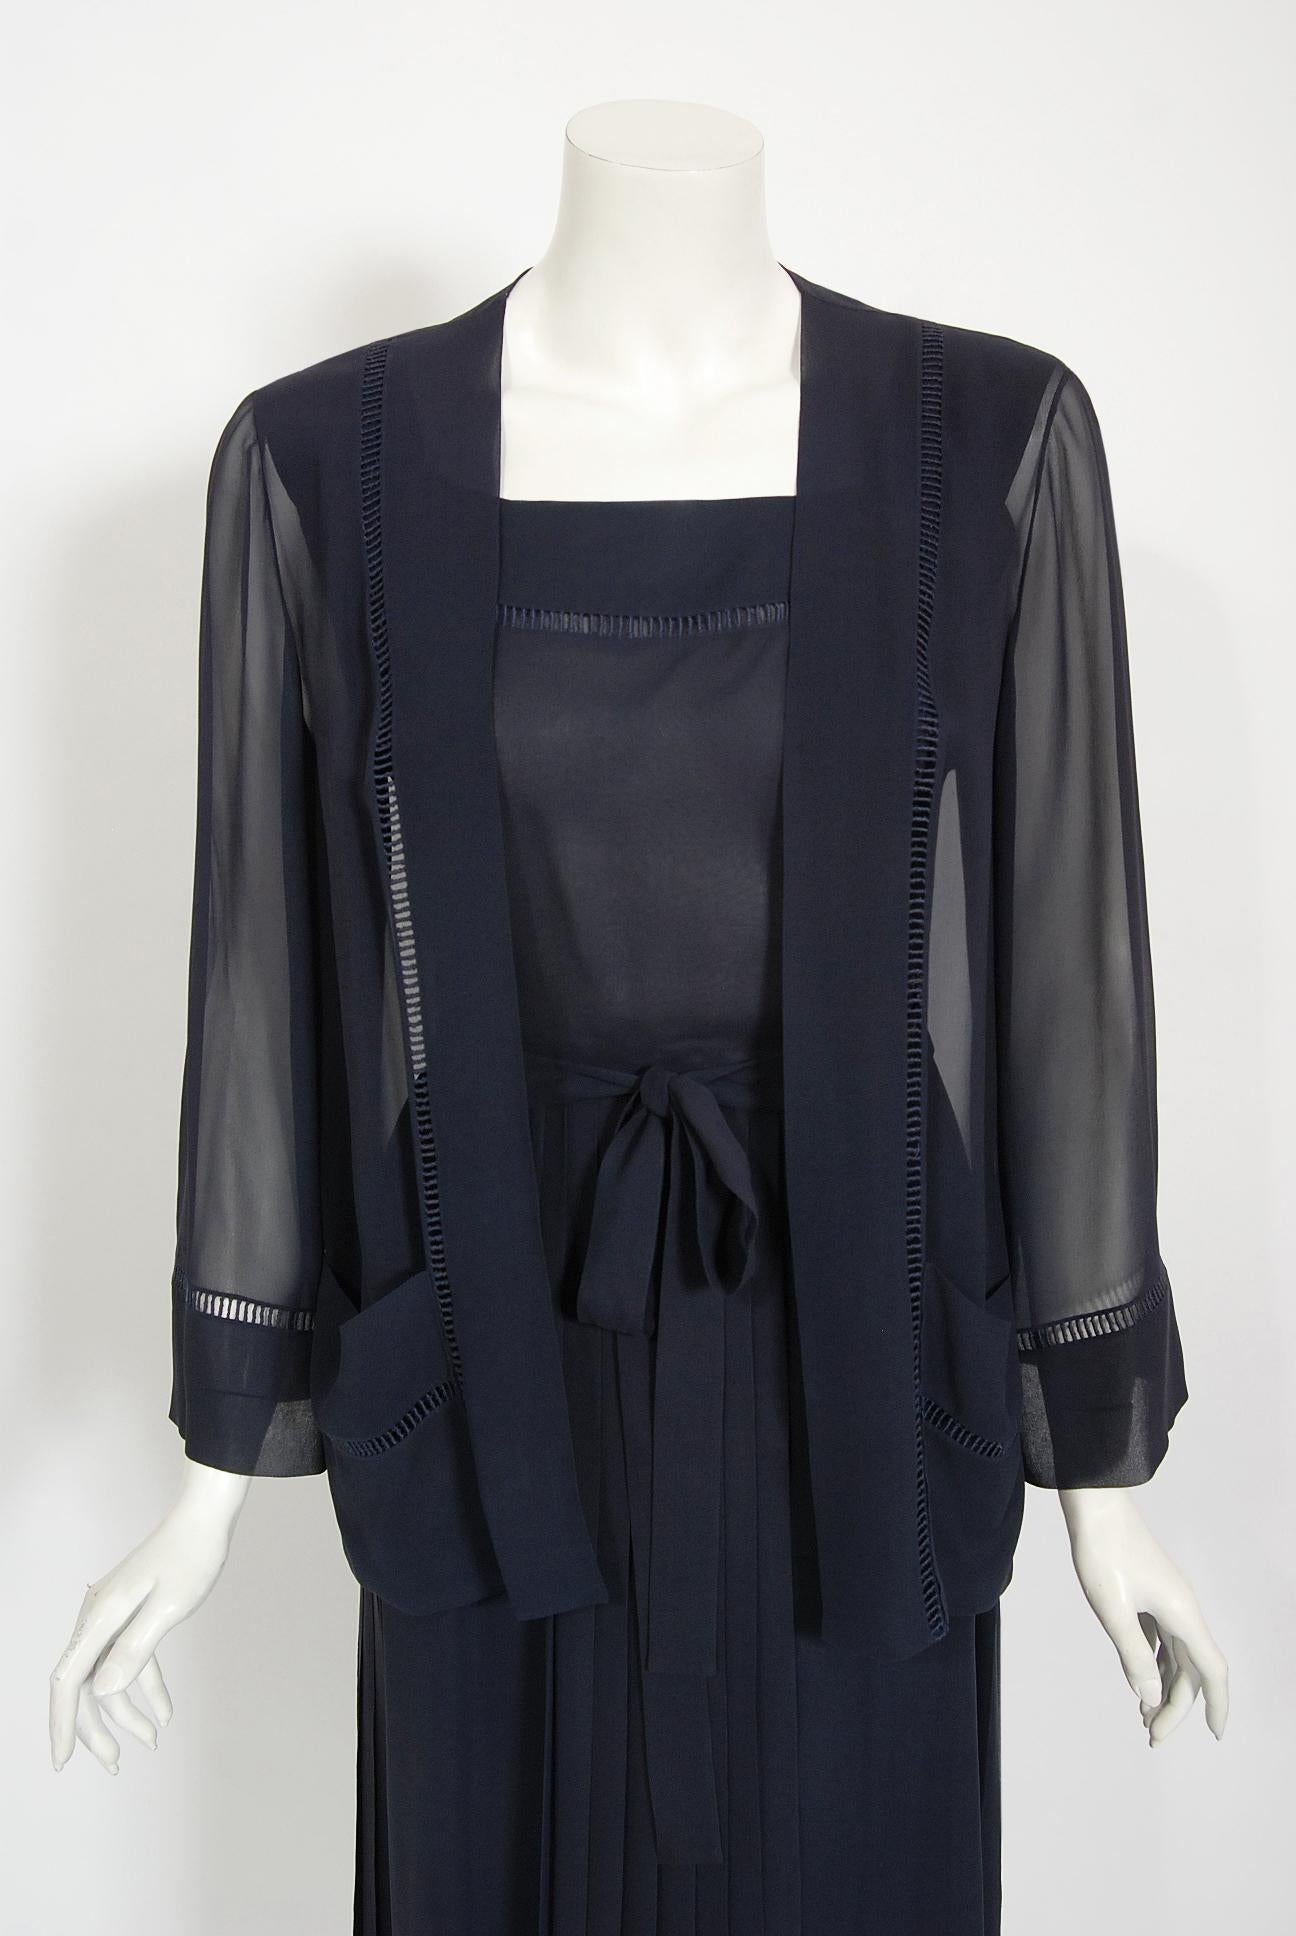 Black Vintage 1974 Christian Dior Haute Couture Documented Navy Pleated Silk Dress Set